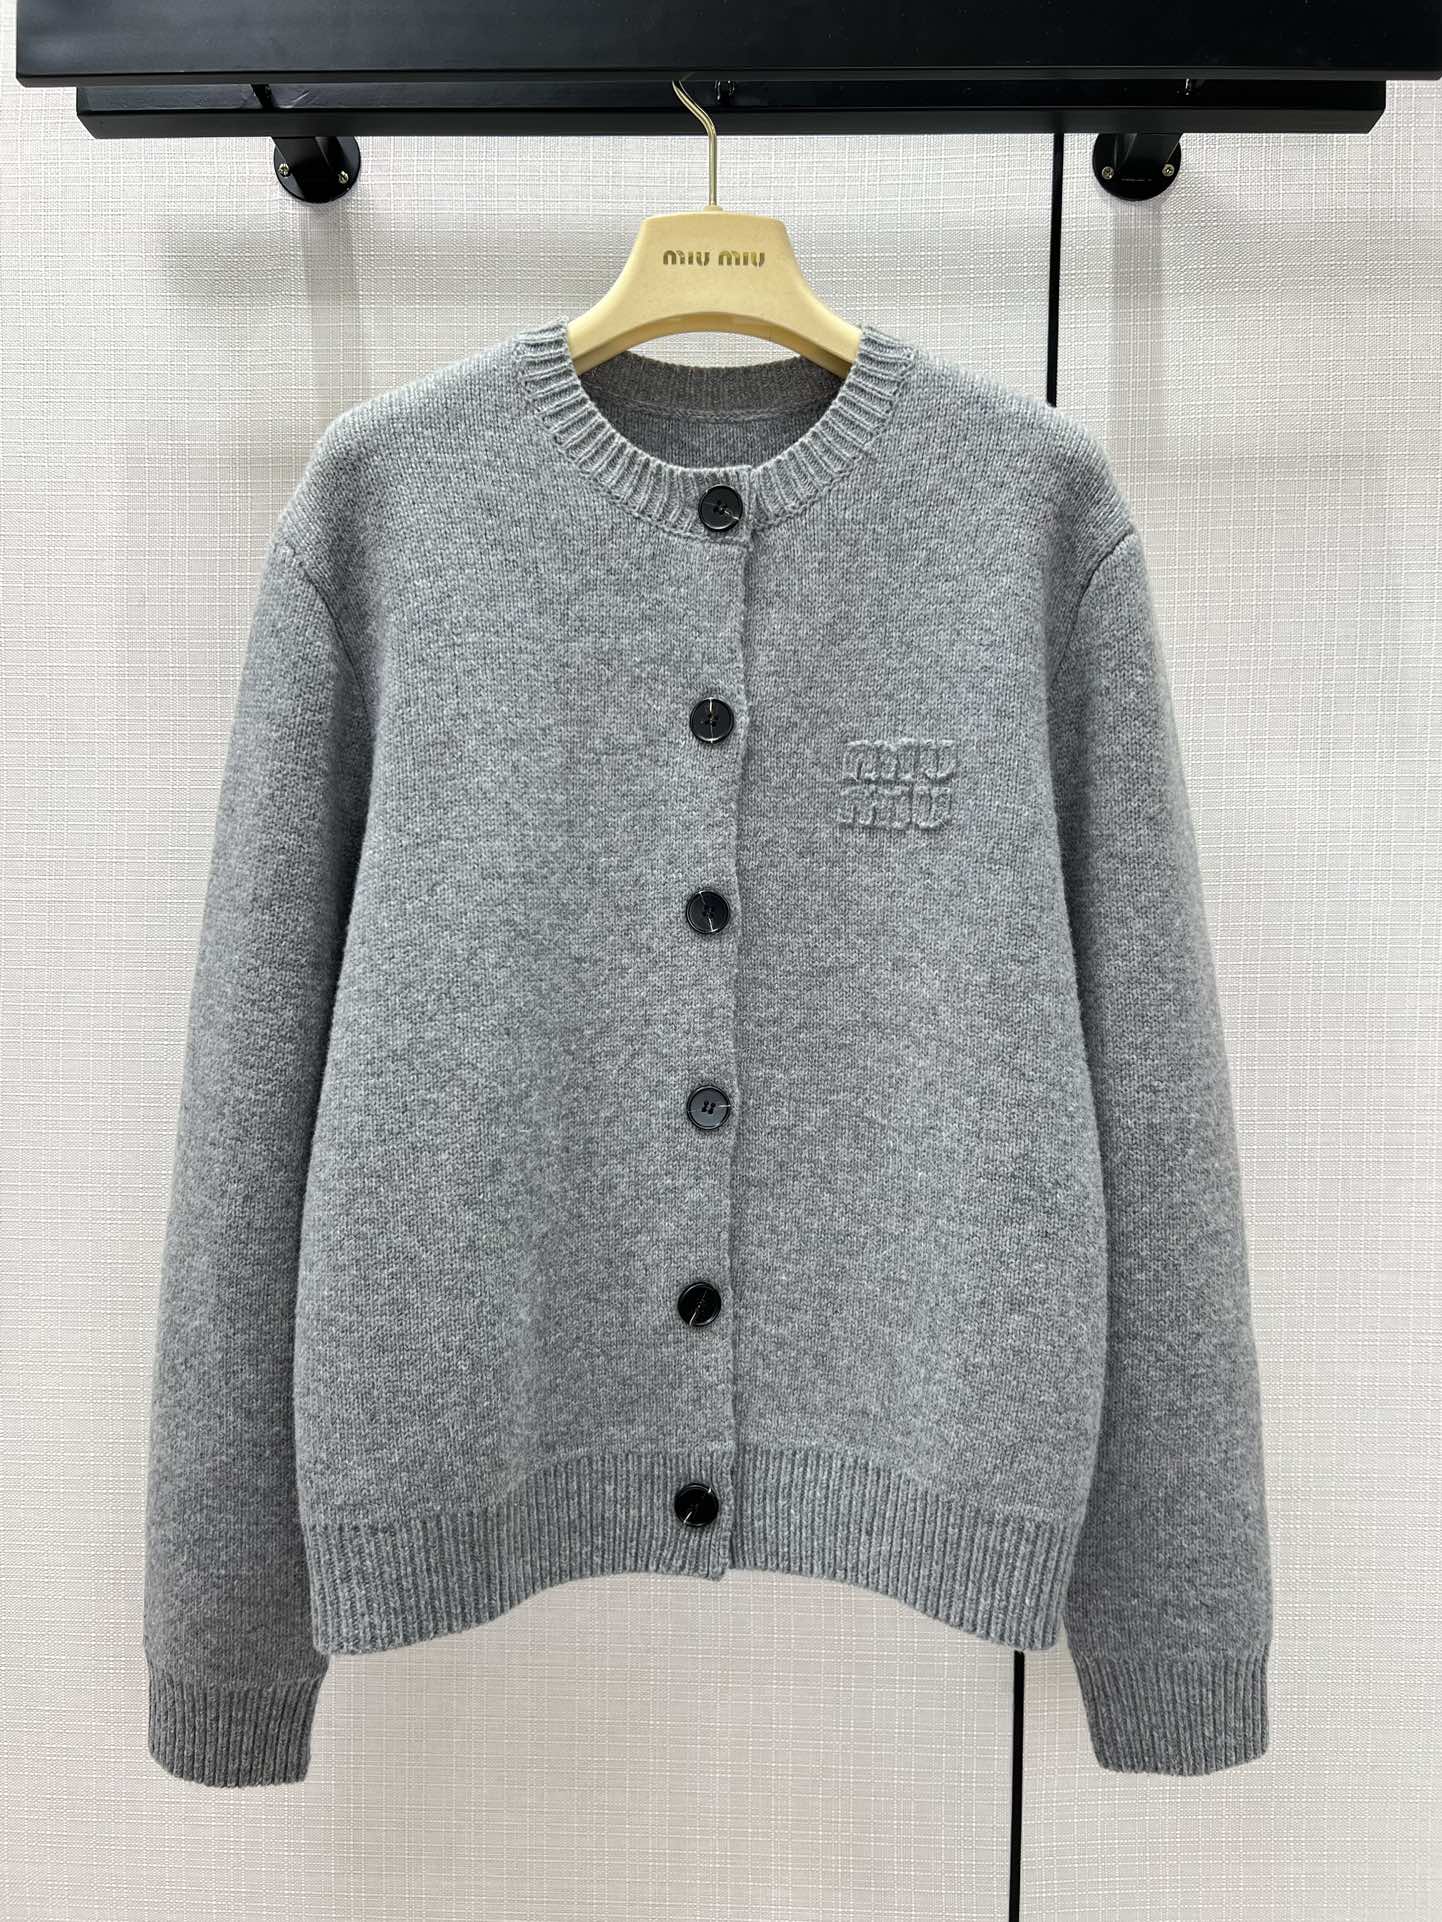 MiuMiu Clothing Coats & Jackets Embroidery Unisex Cashmere Wool Fall/Winter Collection